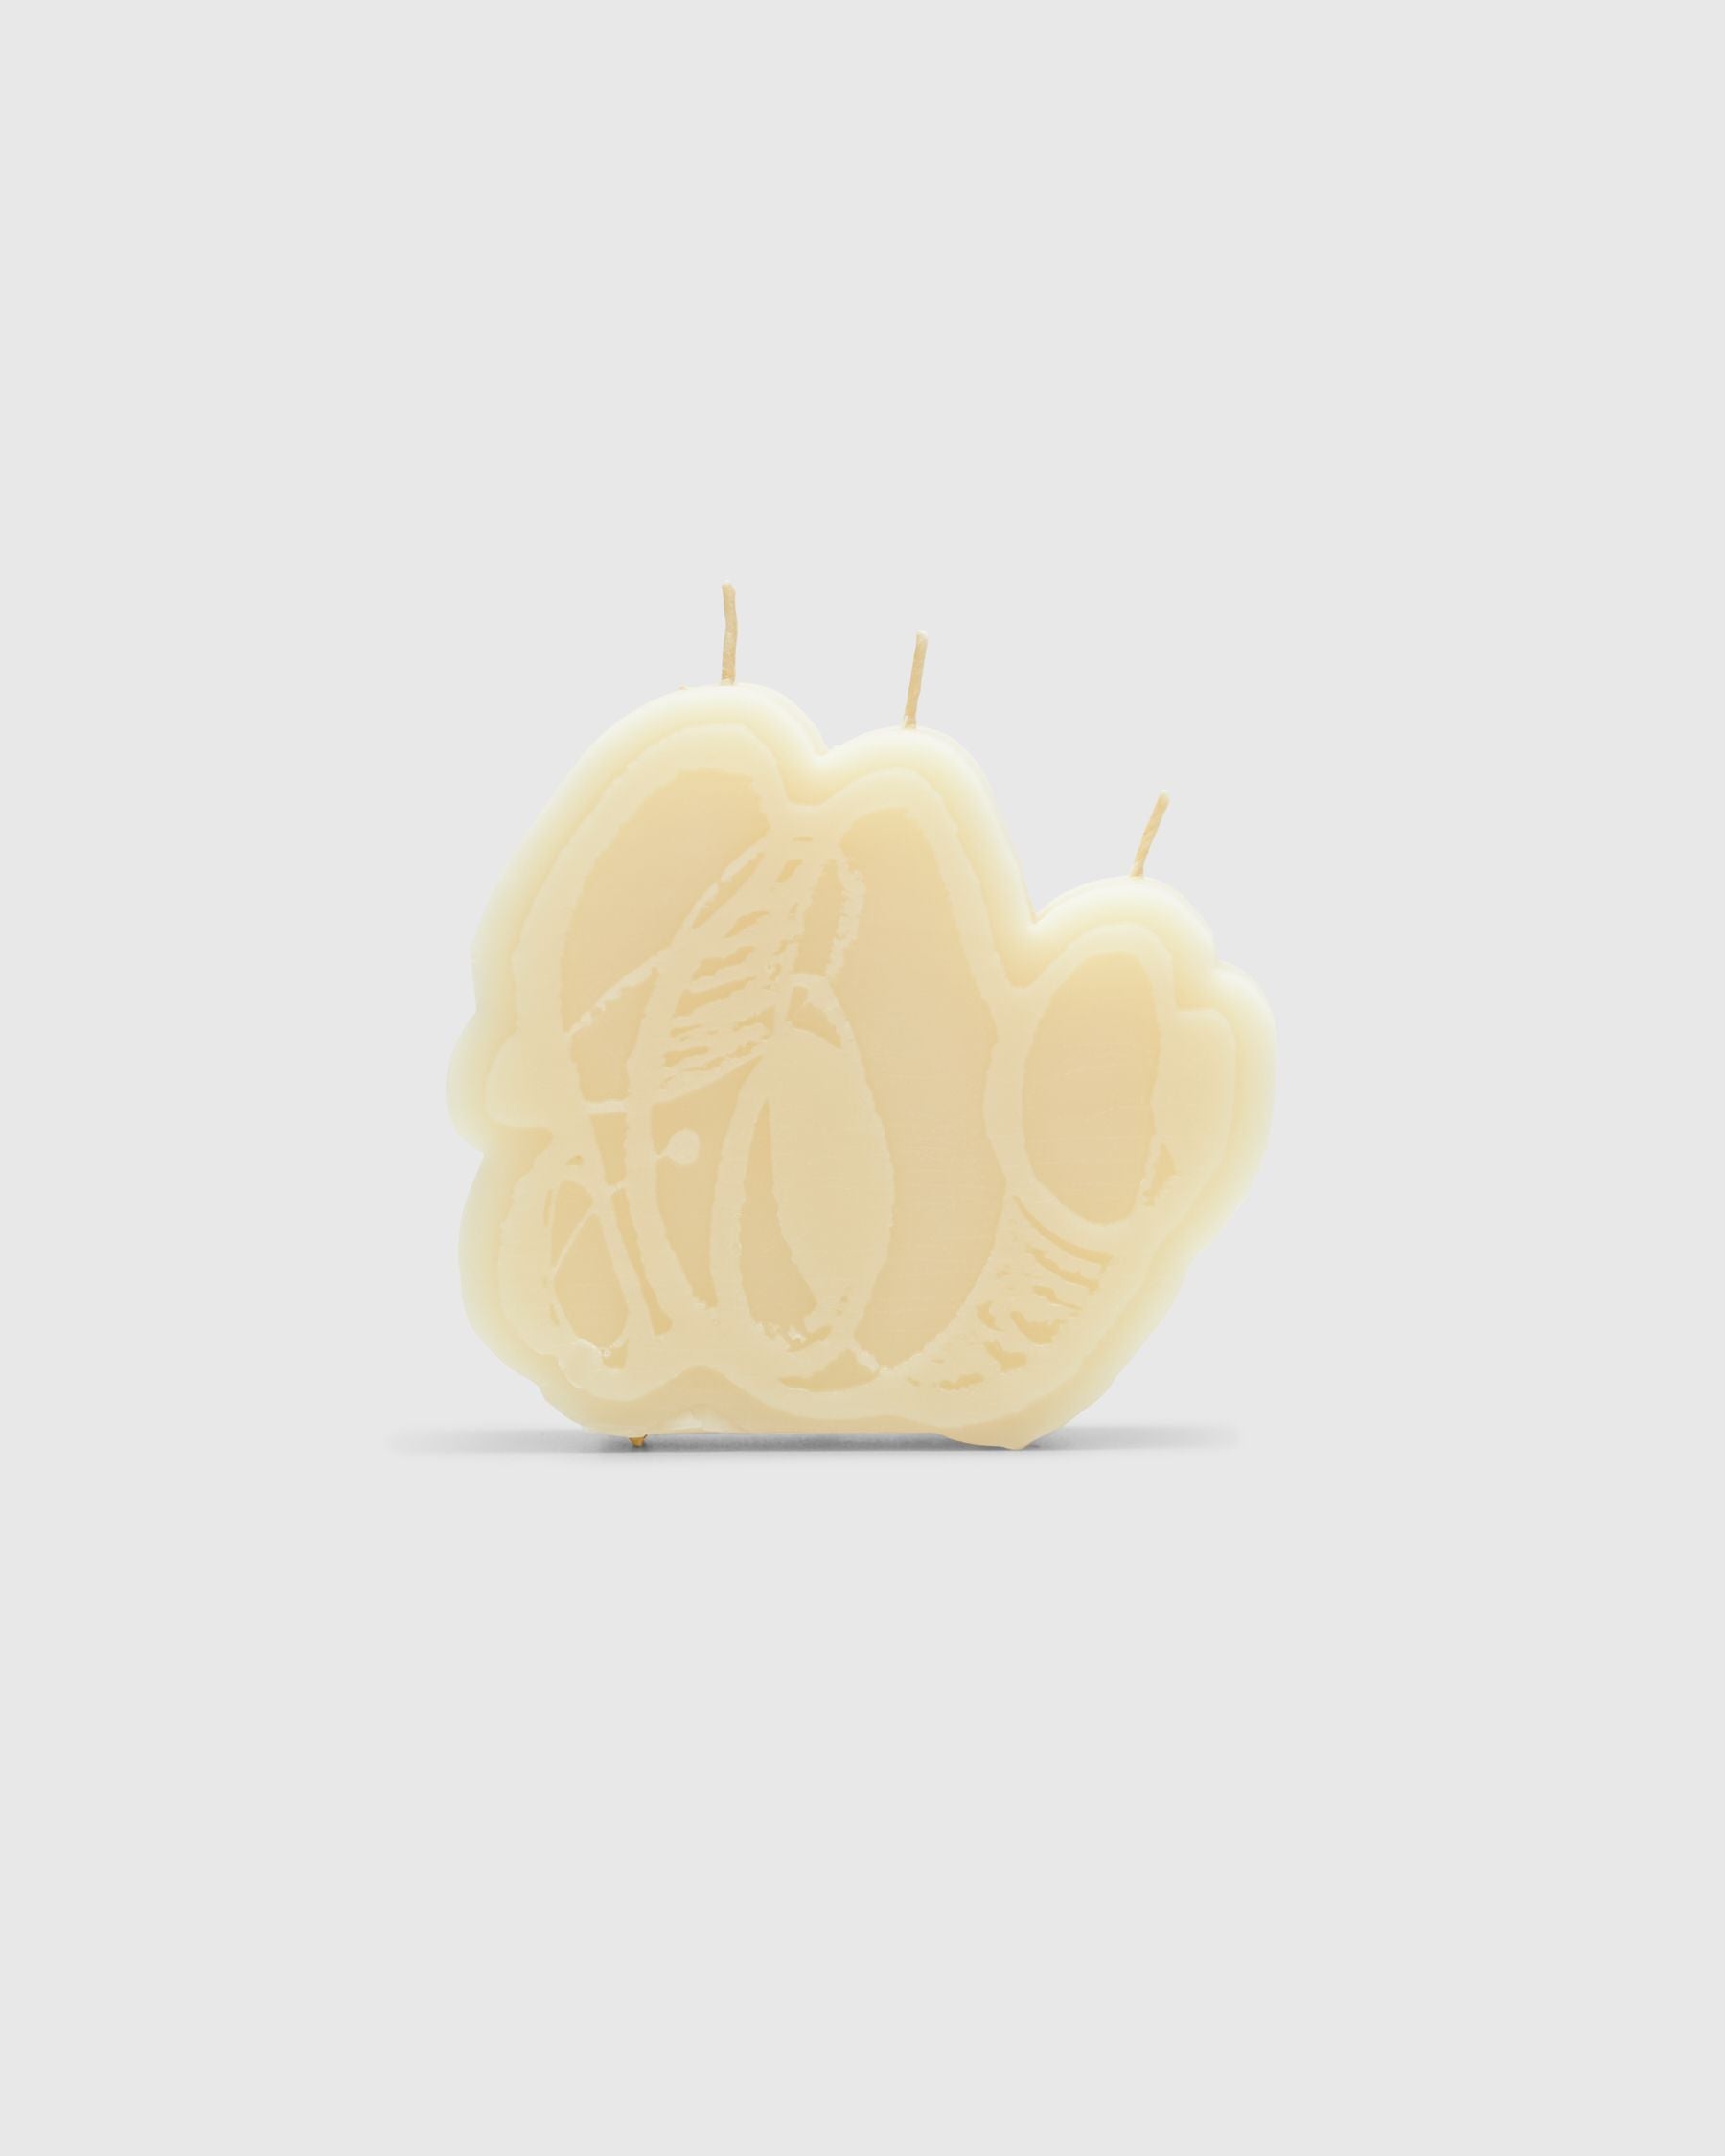 OPENhouse: "A Love Letter" Molded Candle